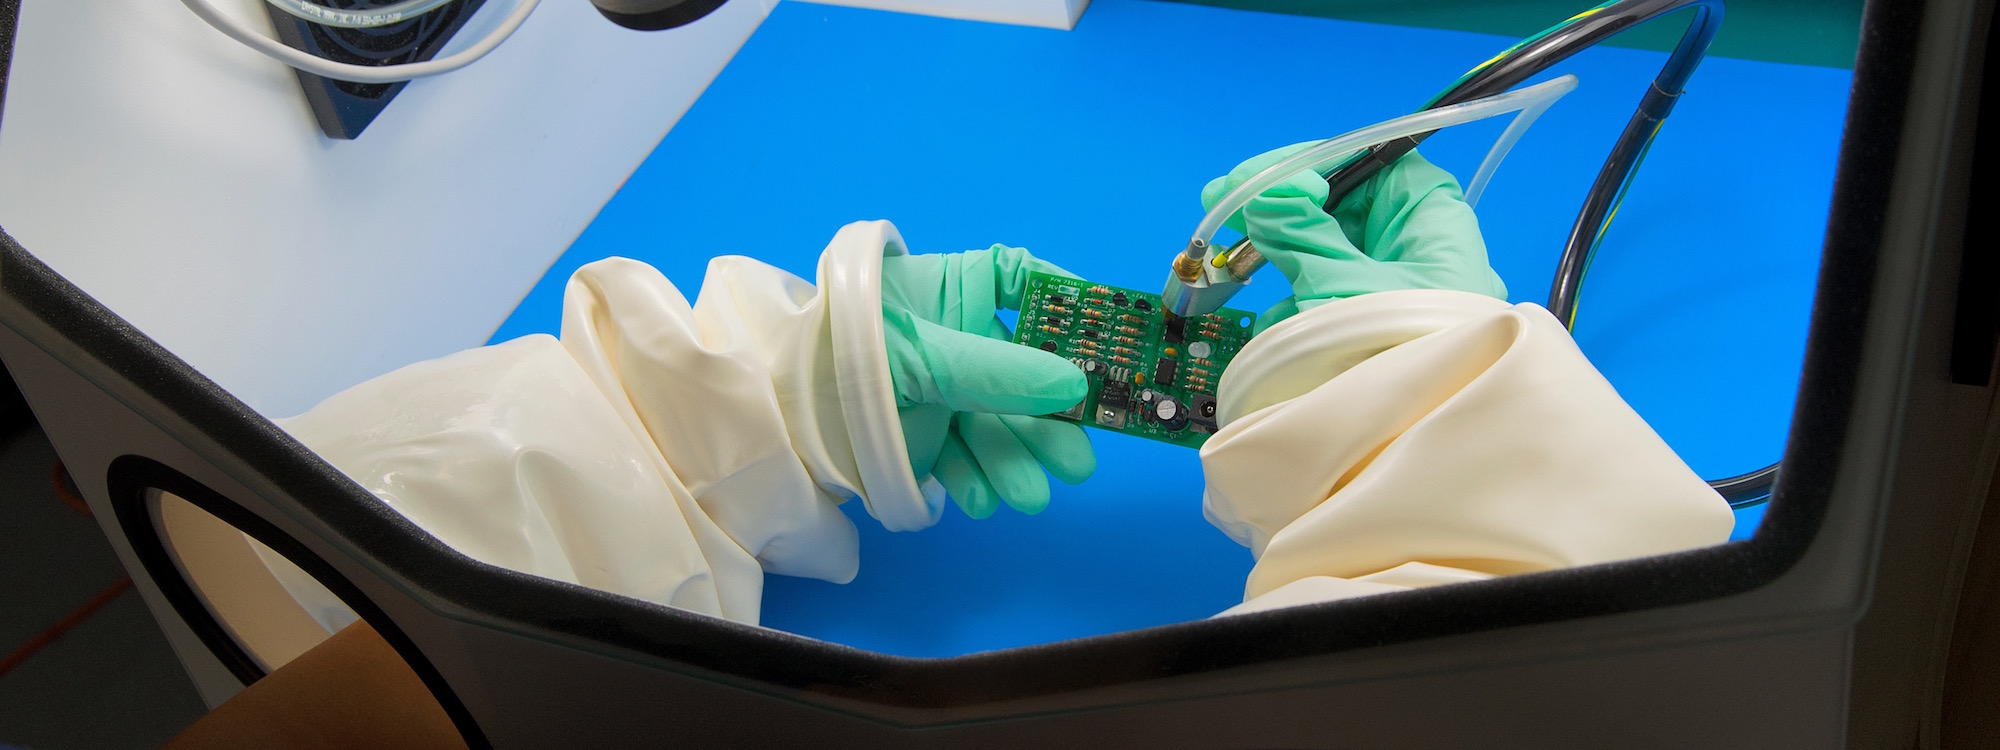 Conformal Coating Removal from Electronic Circuit Boards | Precision, Consistency, ESD Control with Crystal Mark SWAM Technology